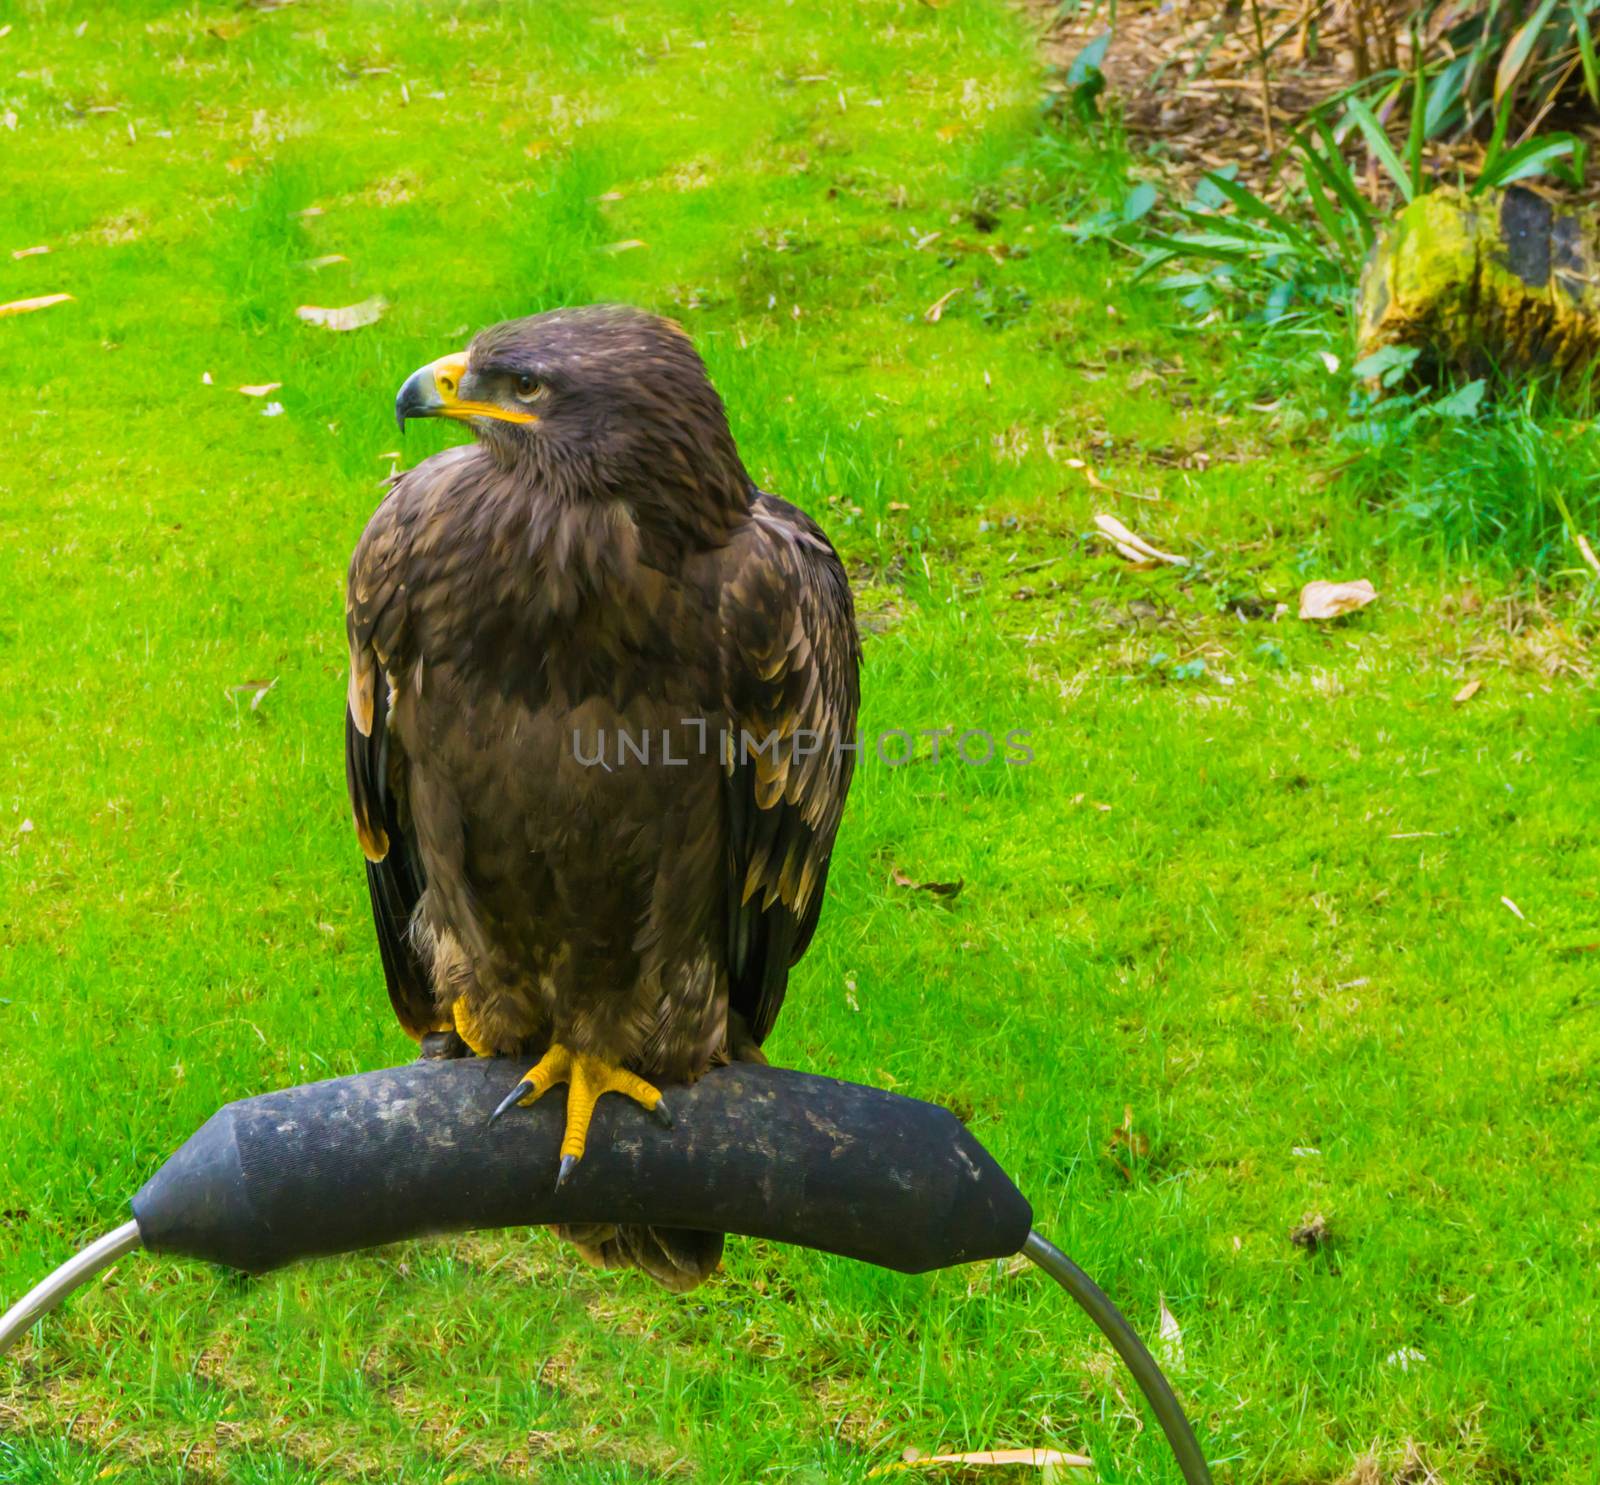 young immature brown bald eagle also known as the sea eagle a beautiful bird of prey portrait